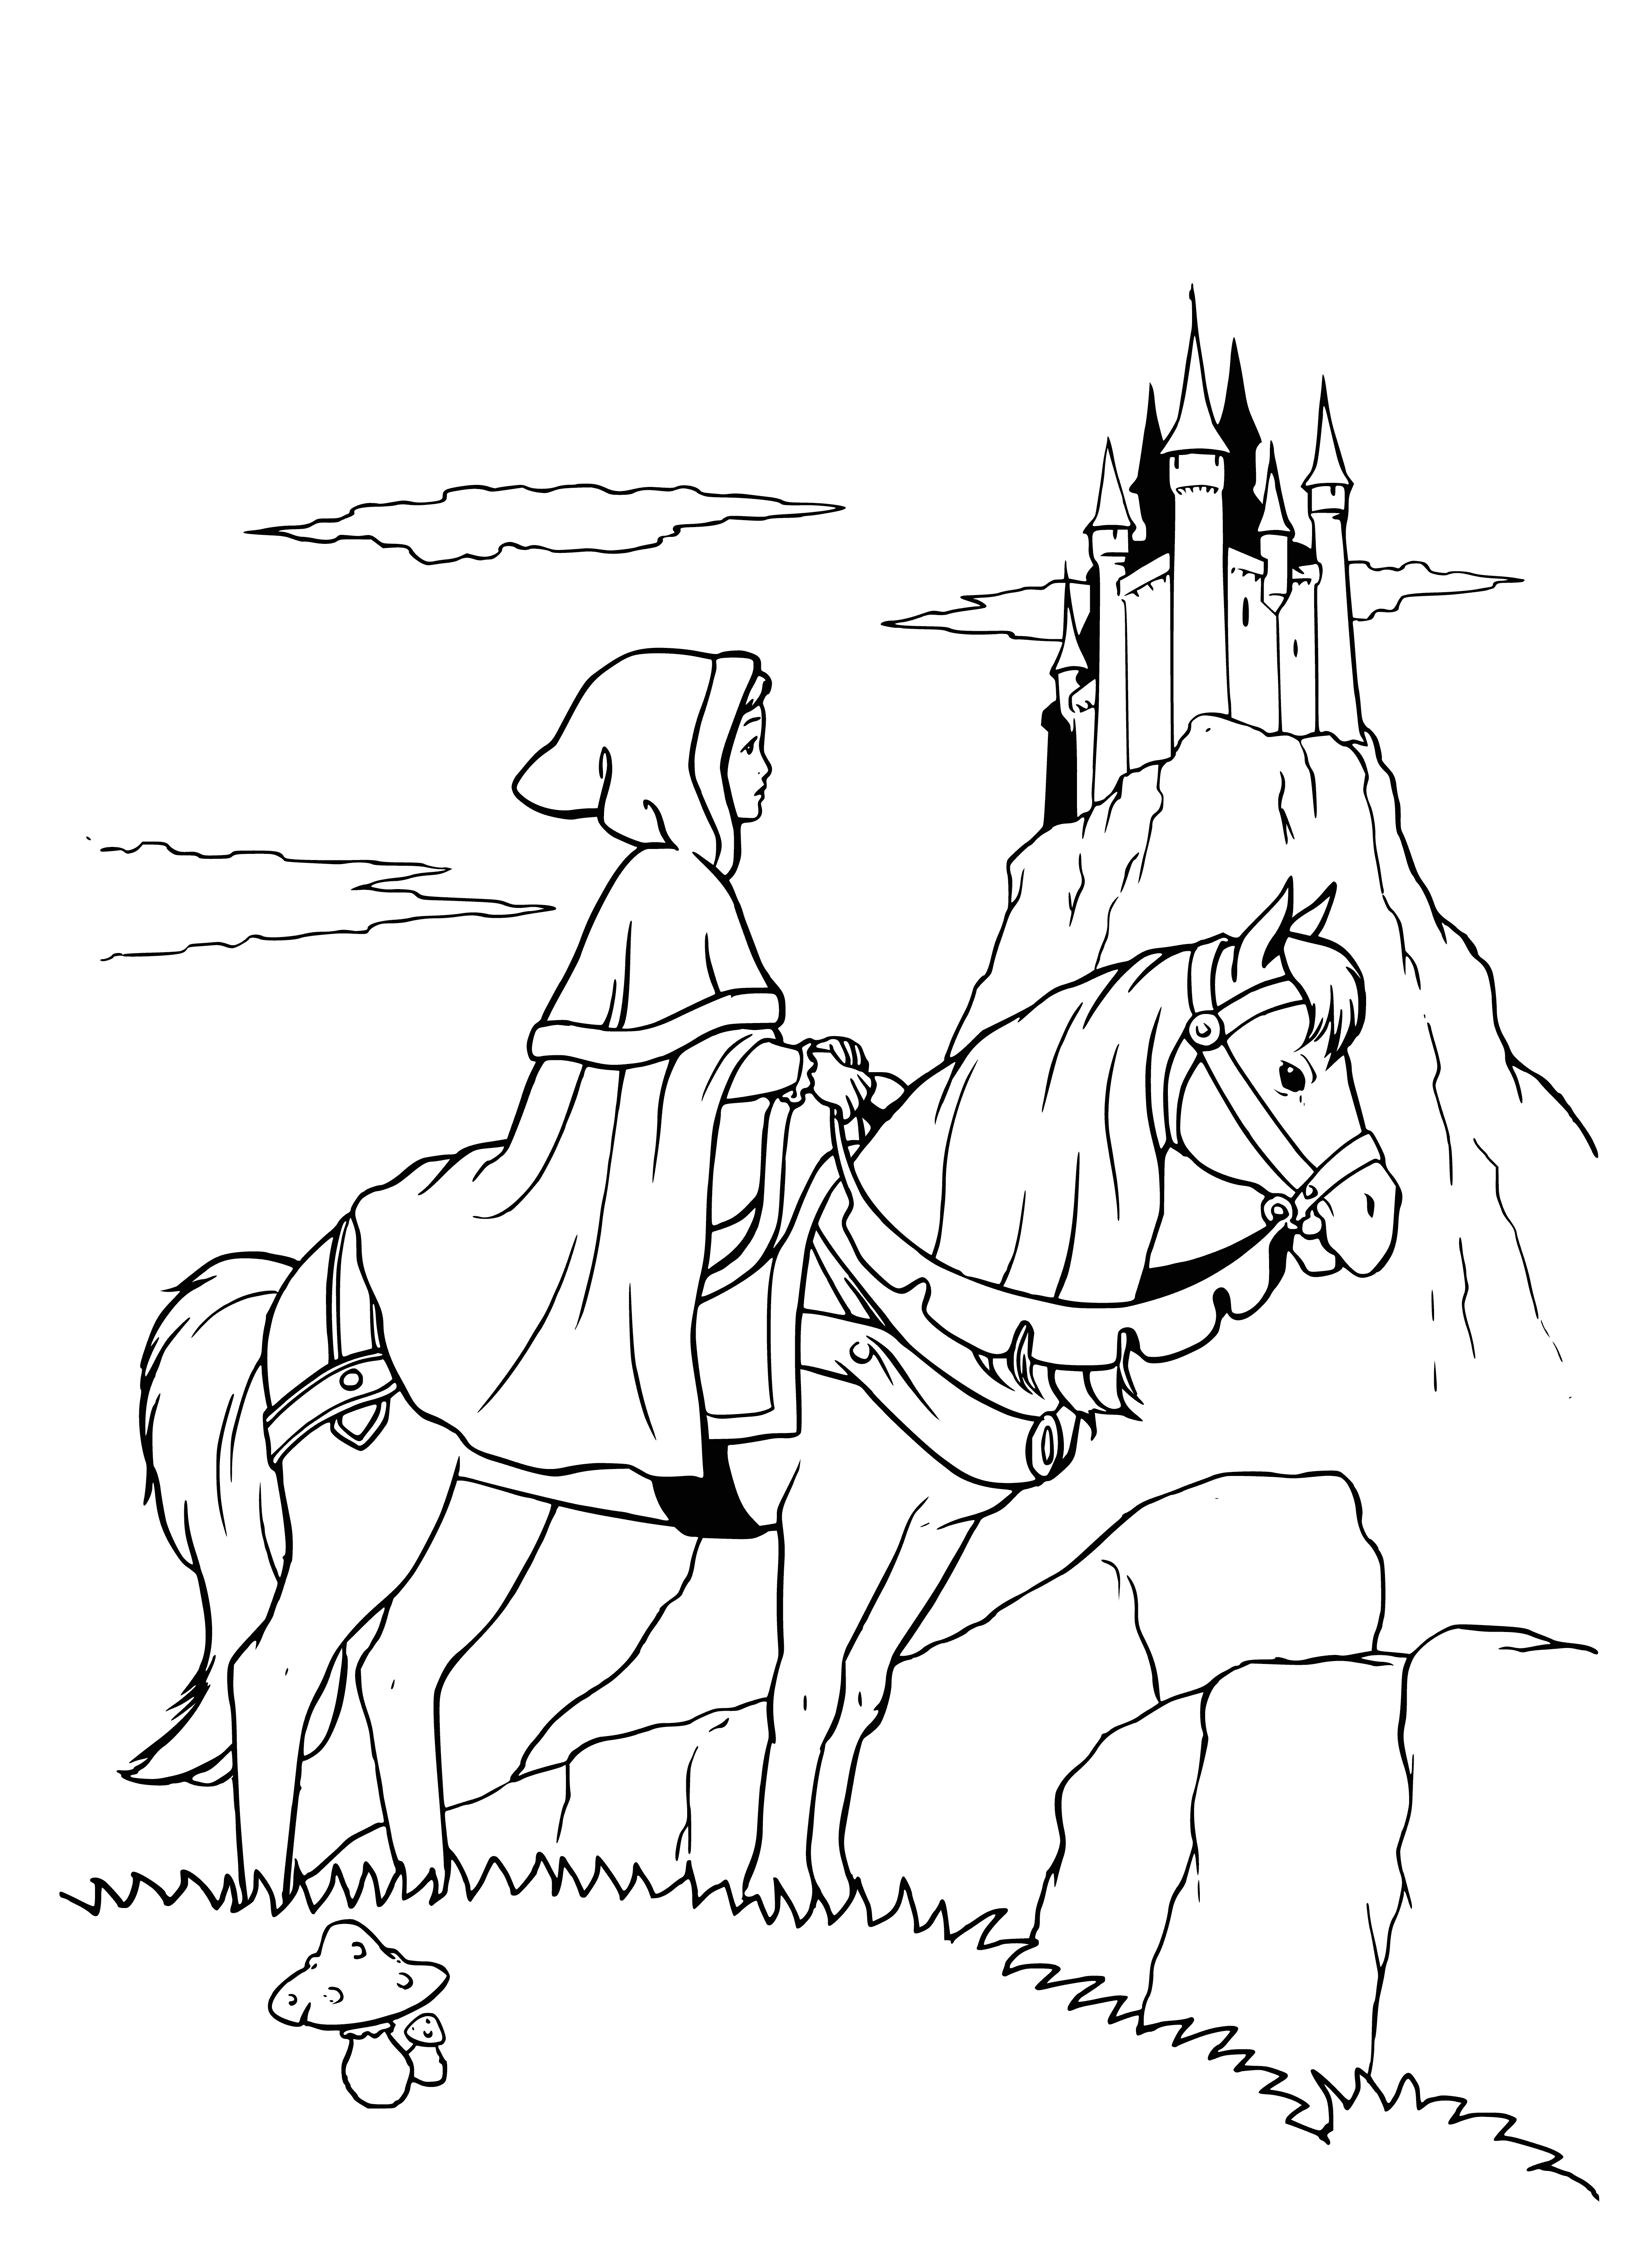 coloring page: Woman stands at a tree, looking at a castle; wearing a white dress and blue scarf, her hair blows in the wind.